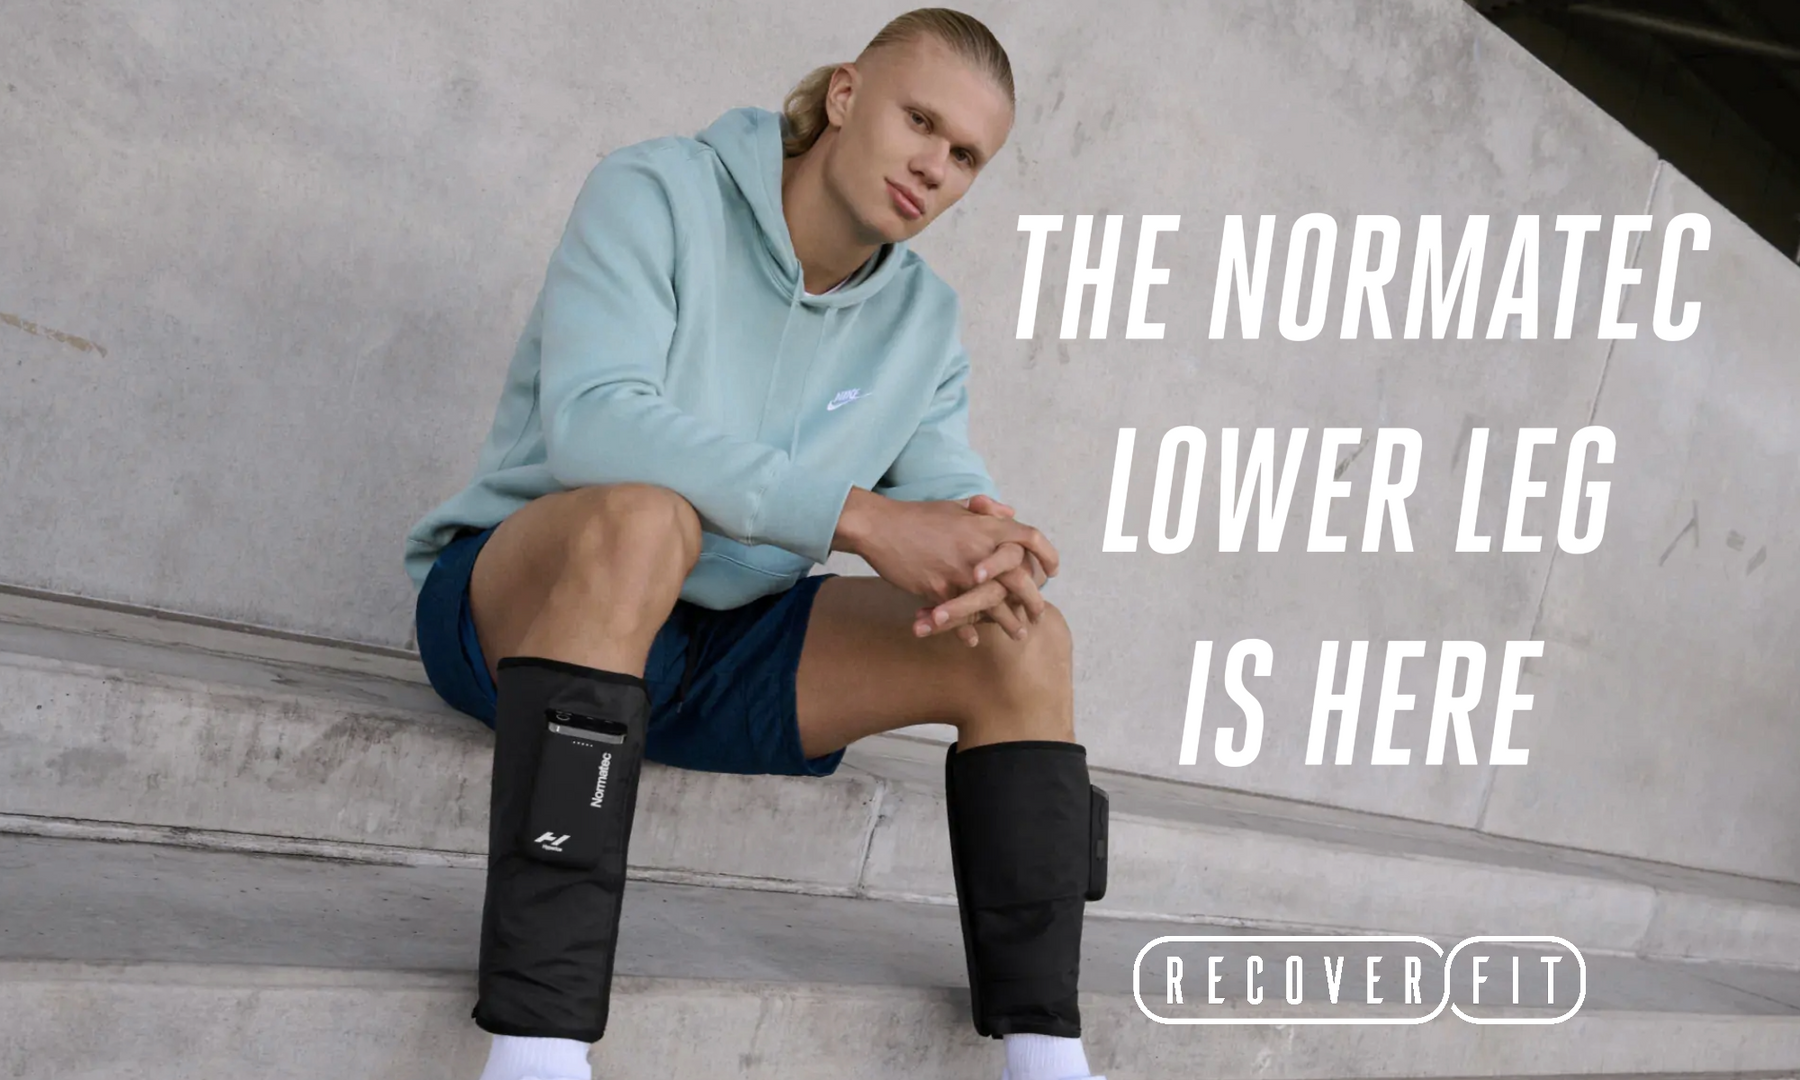 The Normatec Lower Leg Is Here!